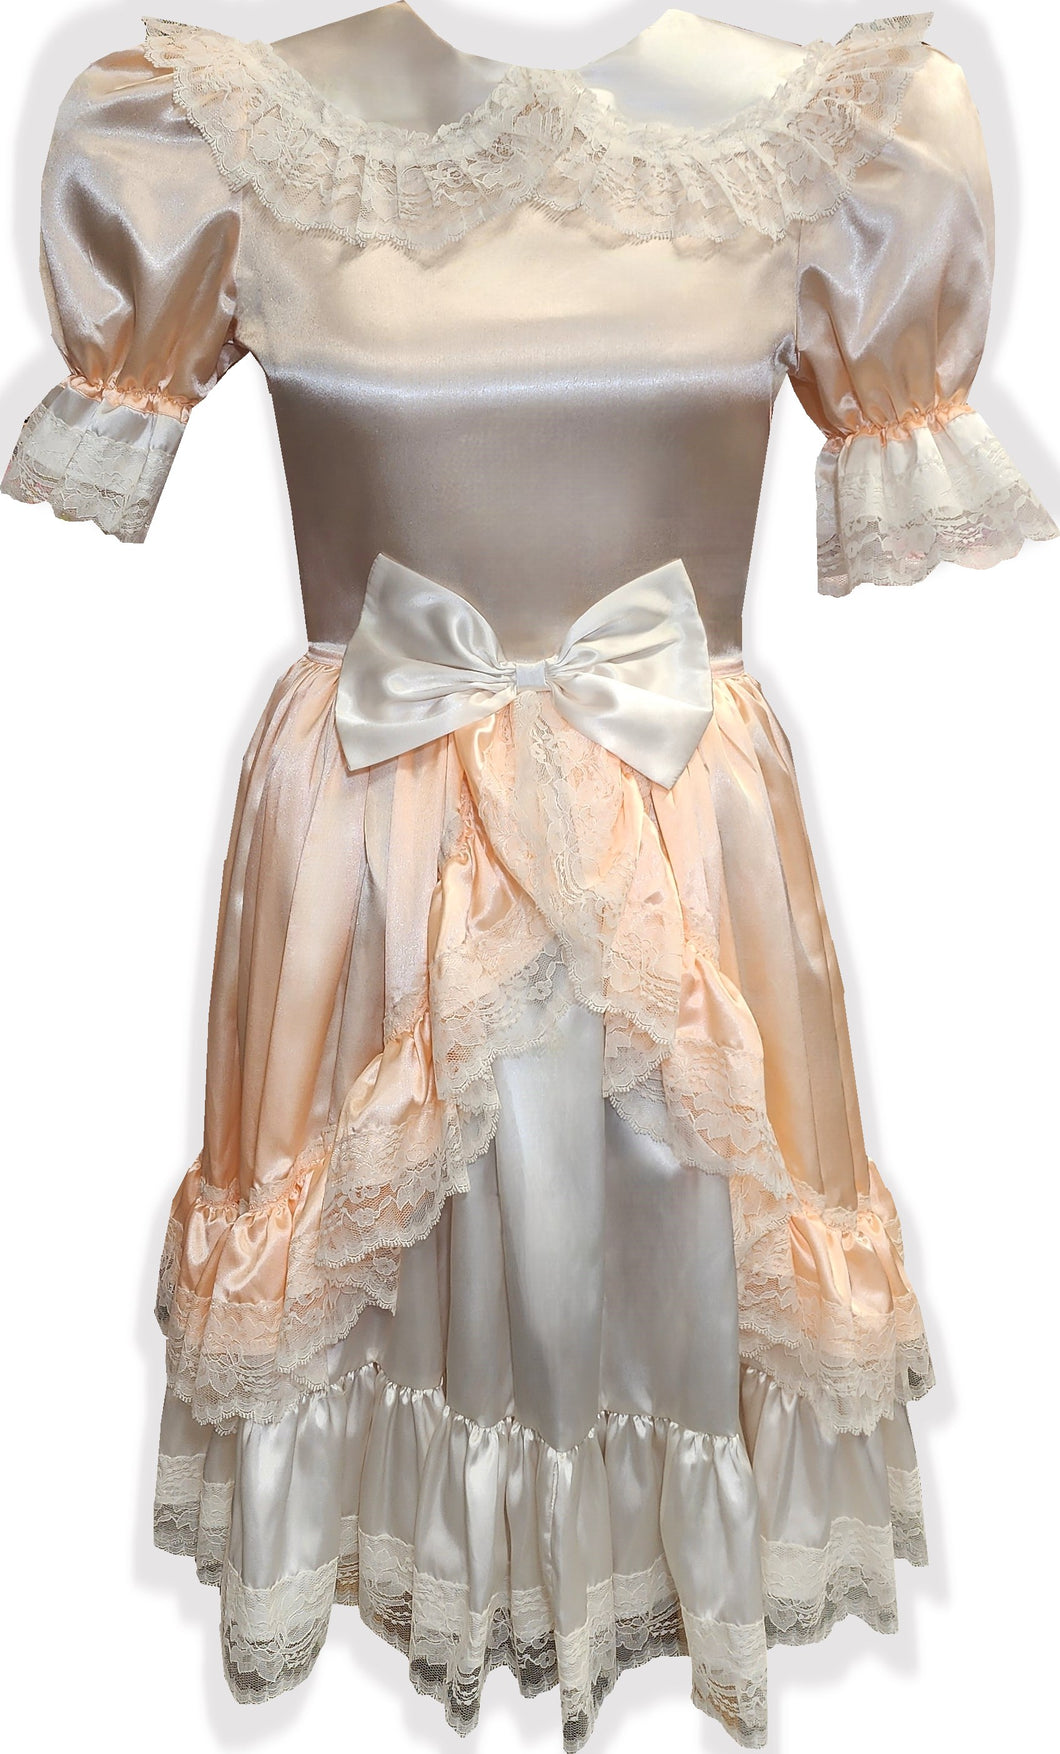 Ready to Wear | Peach Ivory Satin Adult Sissy Dress by Leanne's